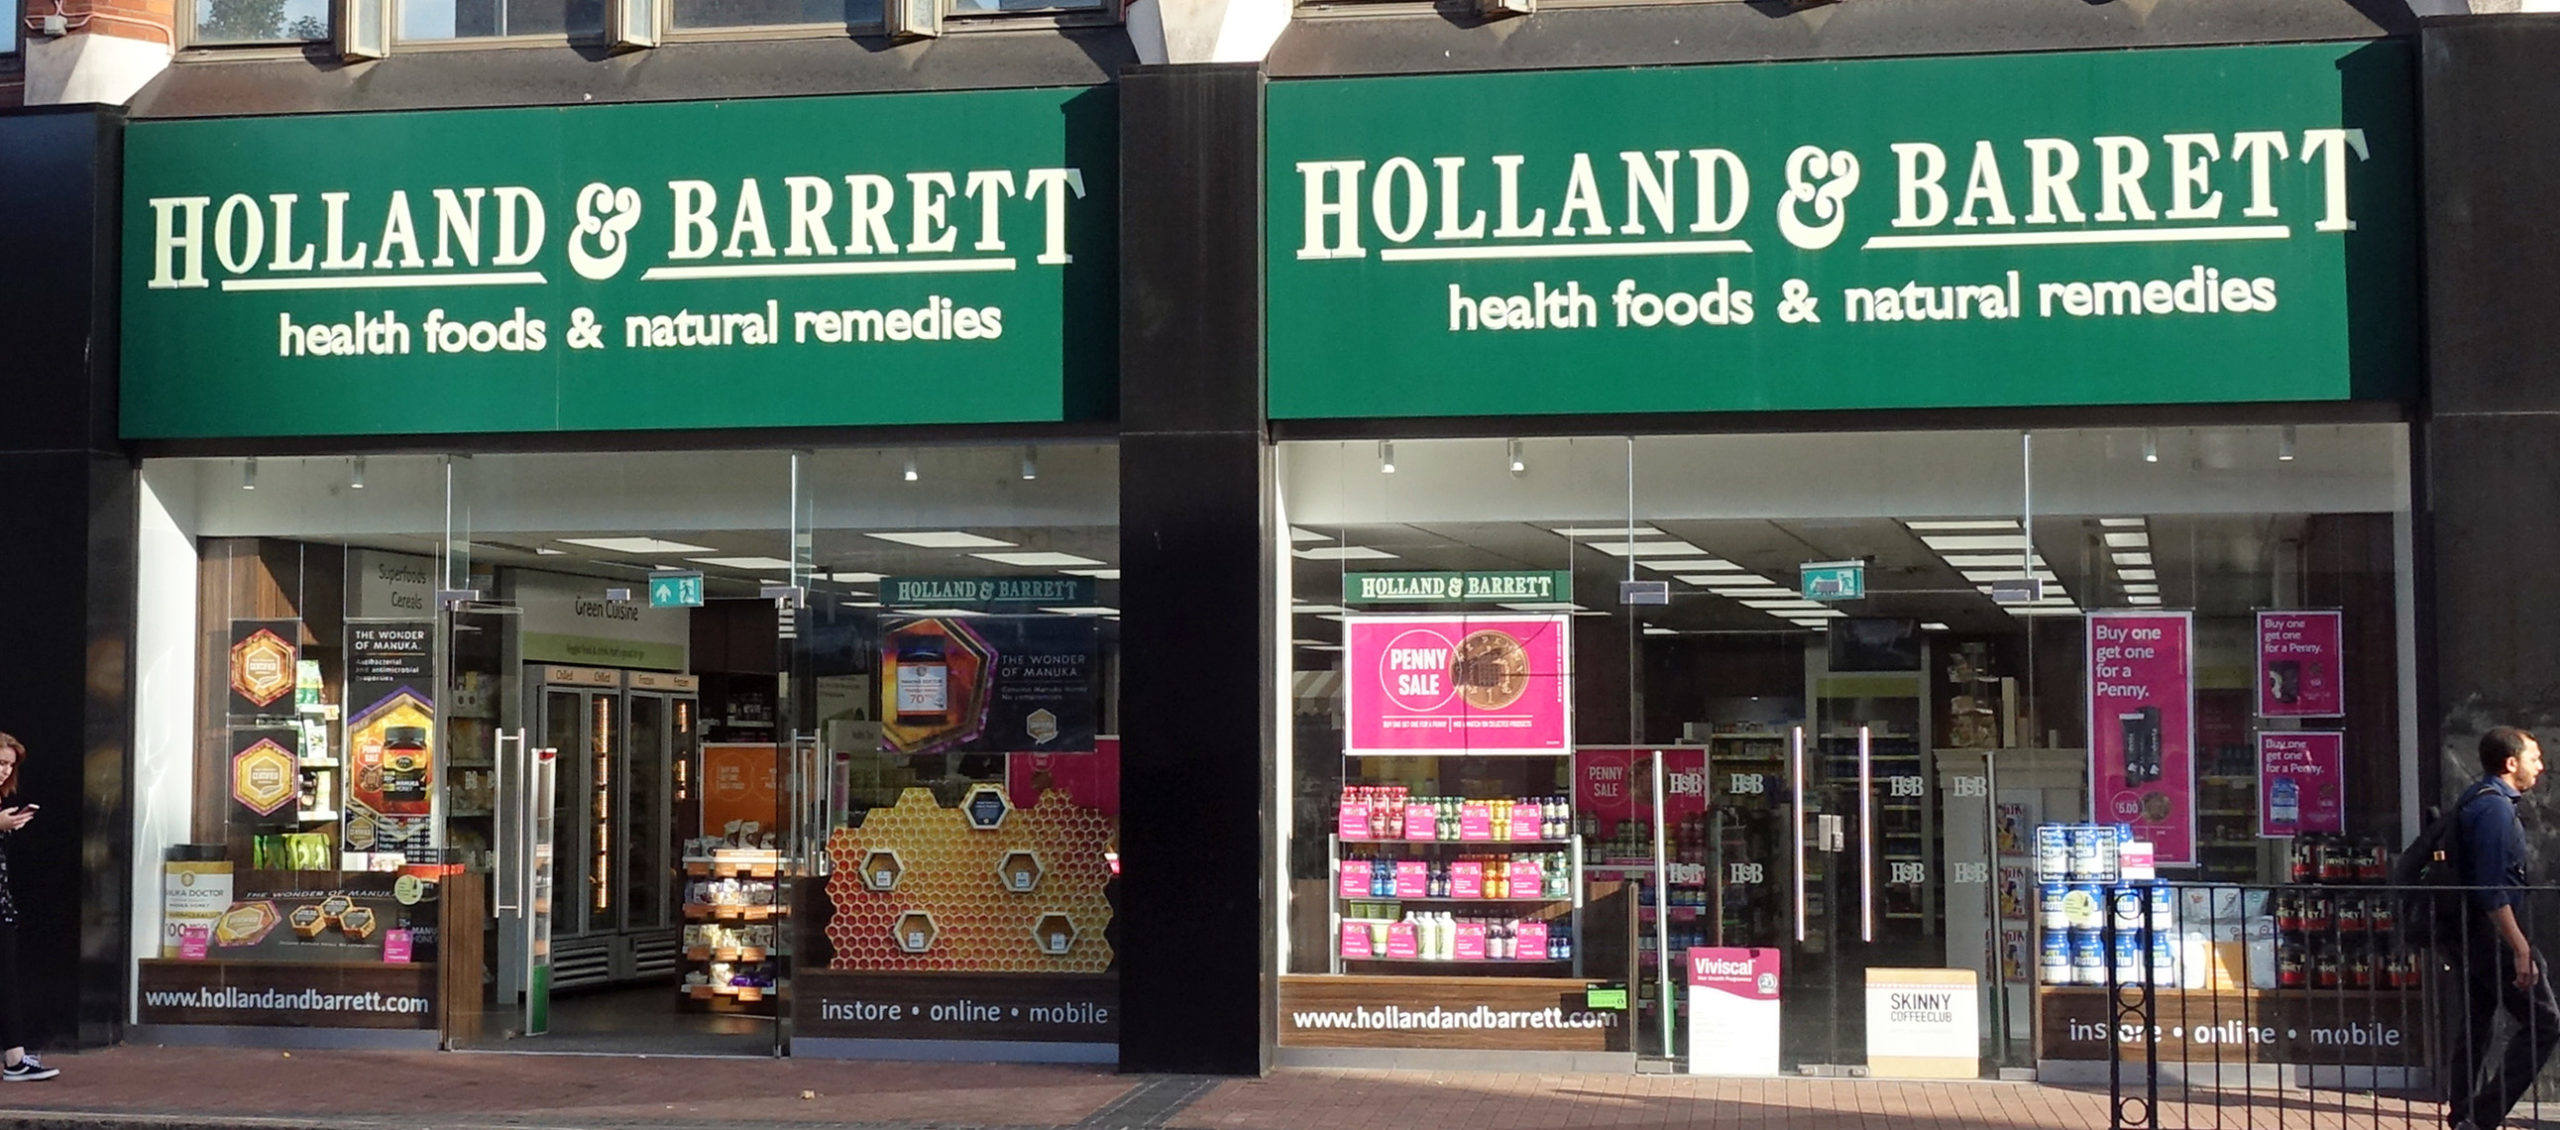 Holland_&_Barrett Long term strategic option - serve a niche -Focus Serve one security sector with a specialised offering. For example, a security service built to meet the needs of the maritime and freight industry.